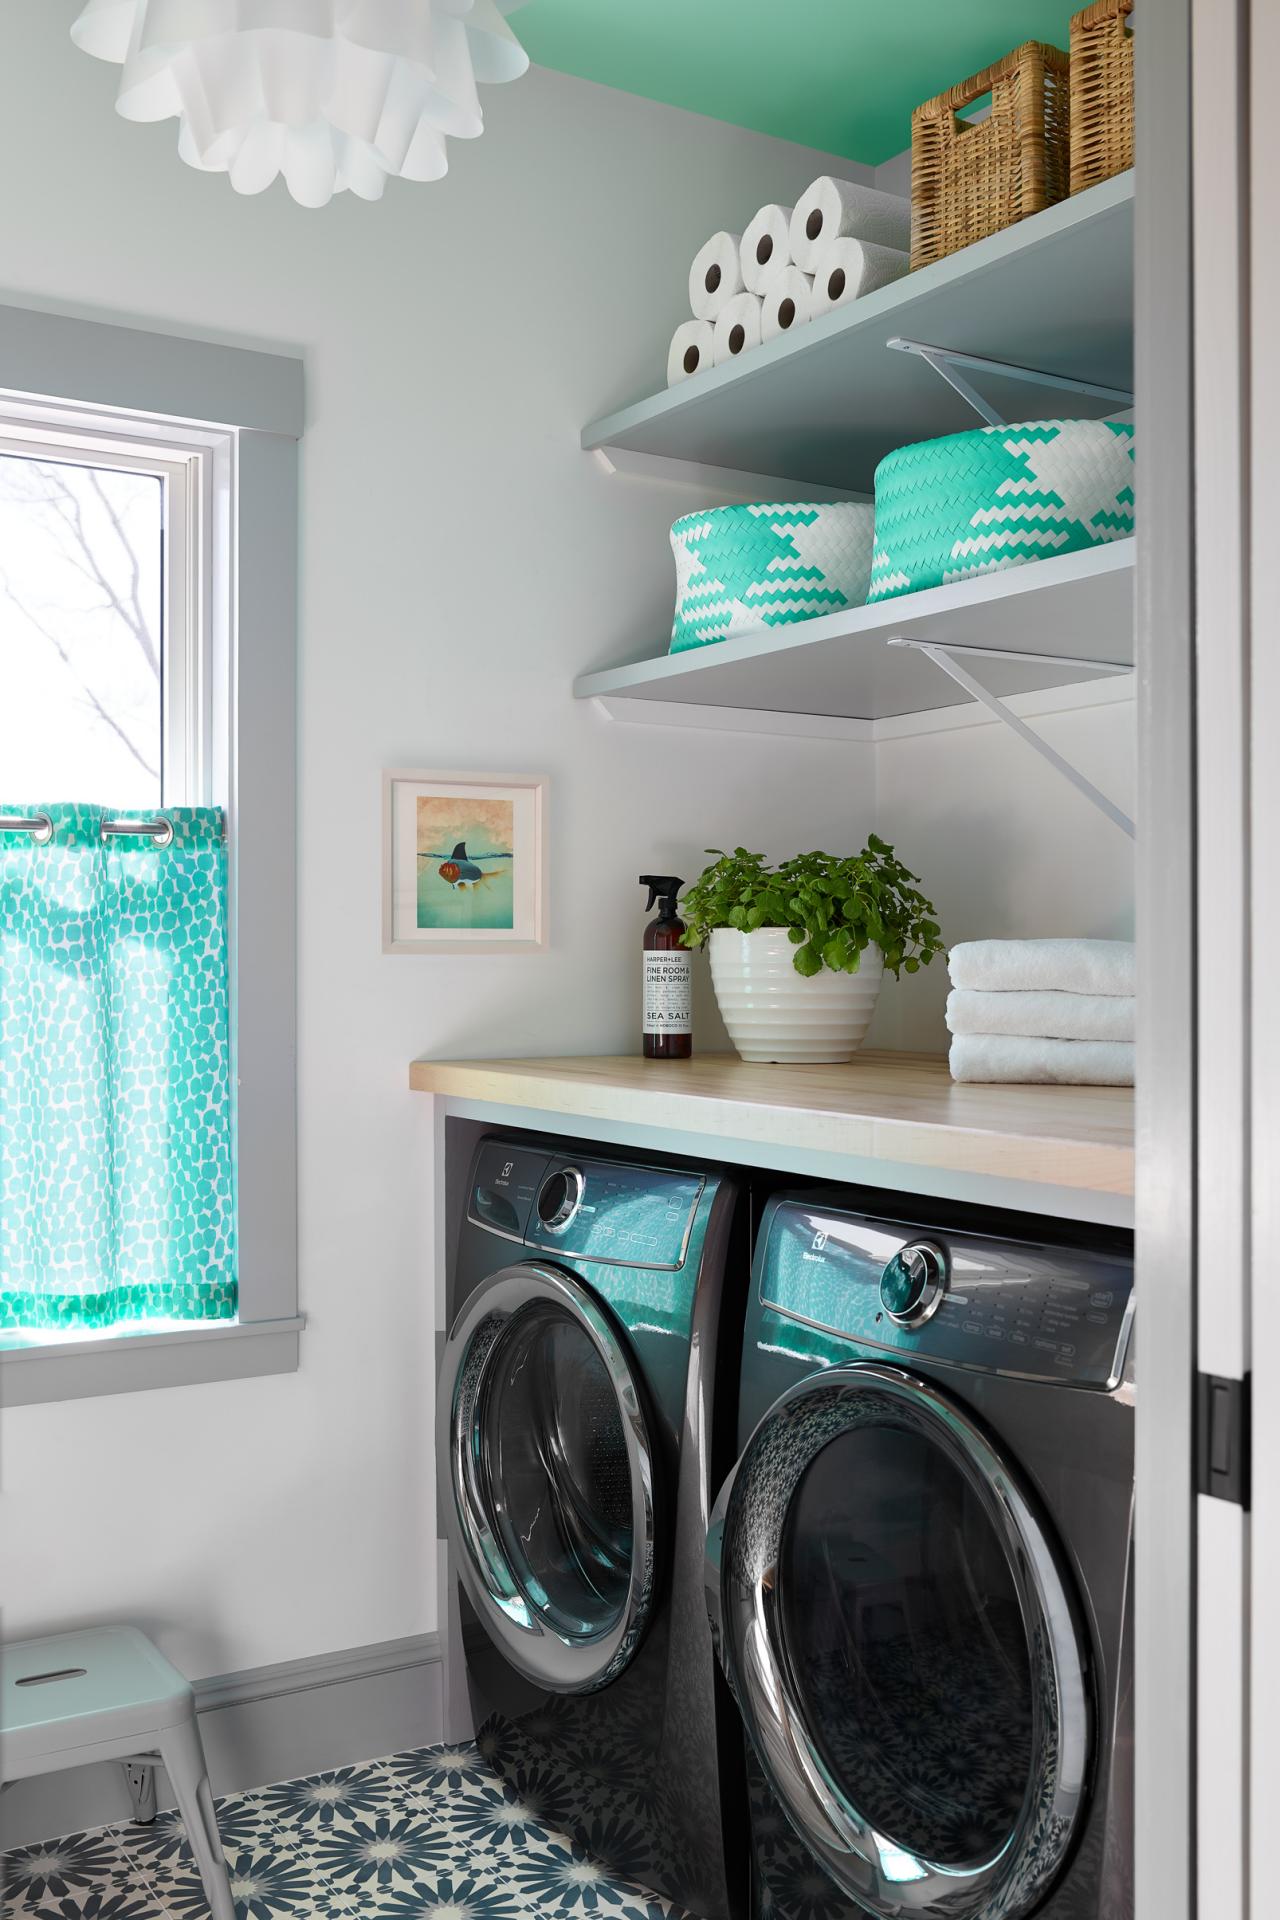 10 Clever Storage Ideas for Your Small Laundry Room | HGTV's Decorating ...